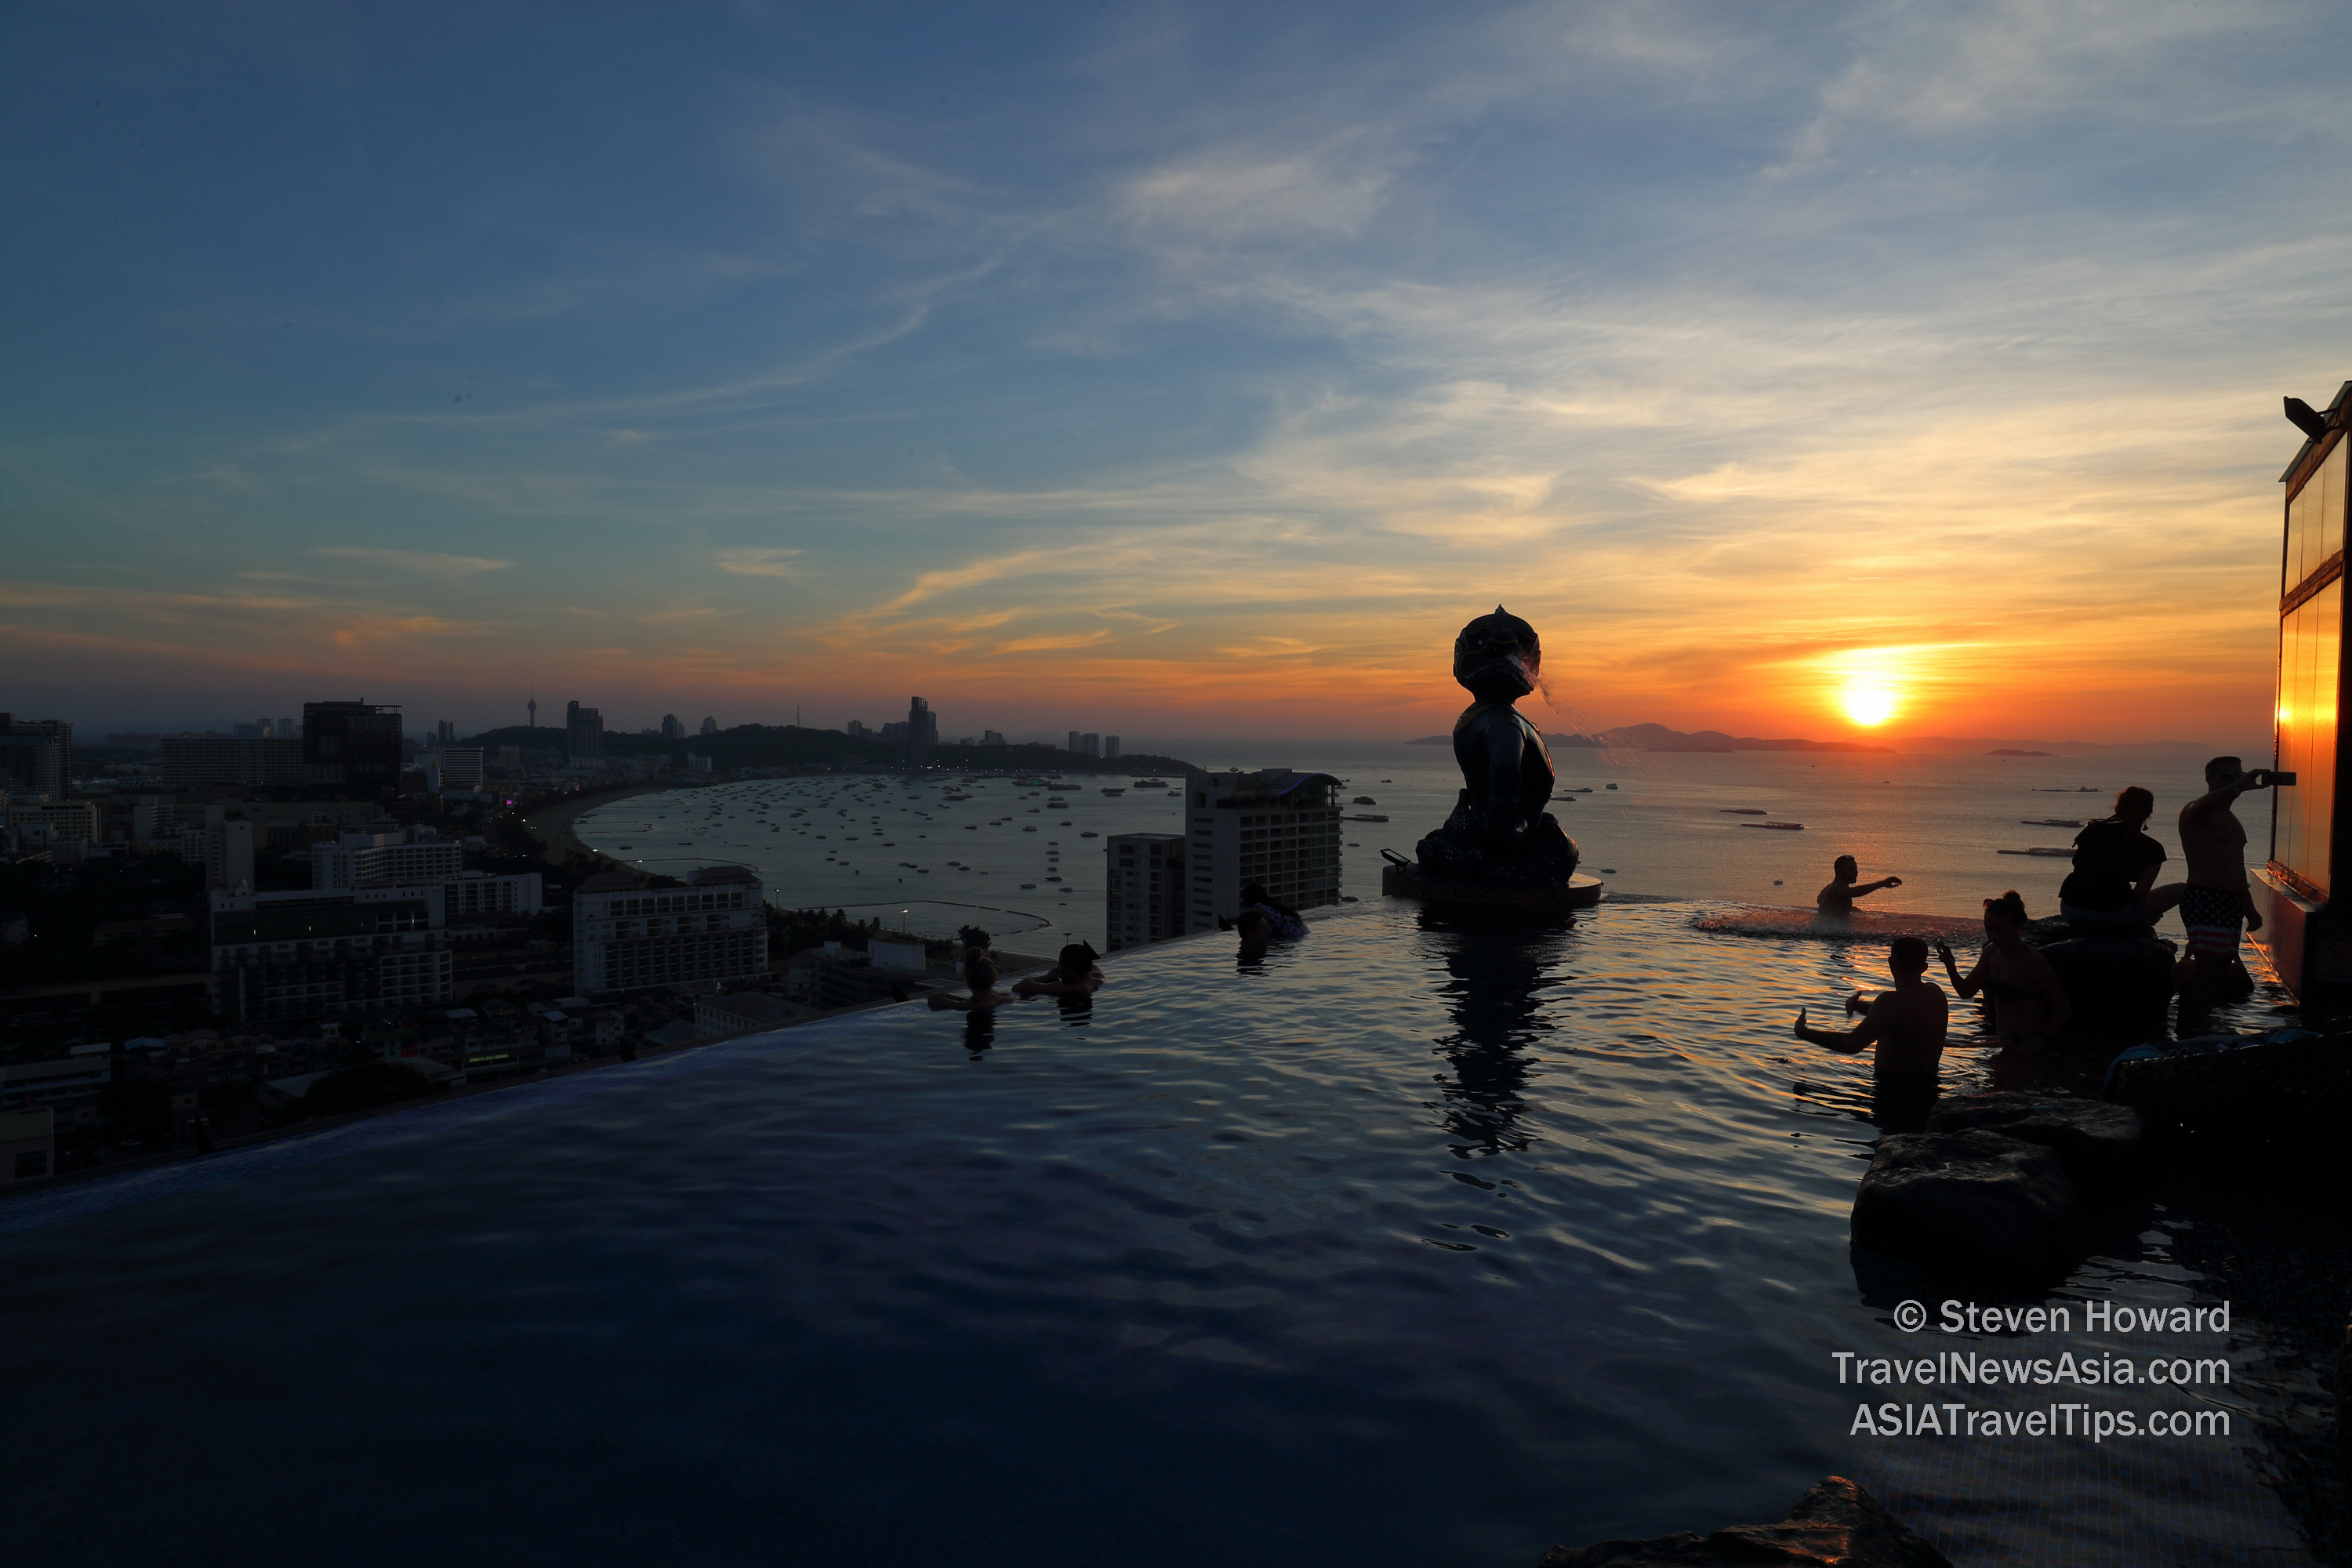 Sunset view from the Sky Bar at Siam@Siam Design Hotel in Pattaya, Thailand